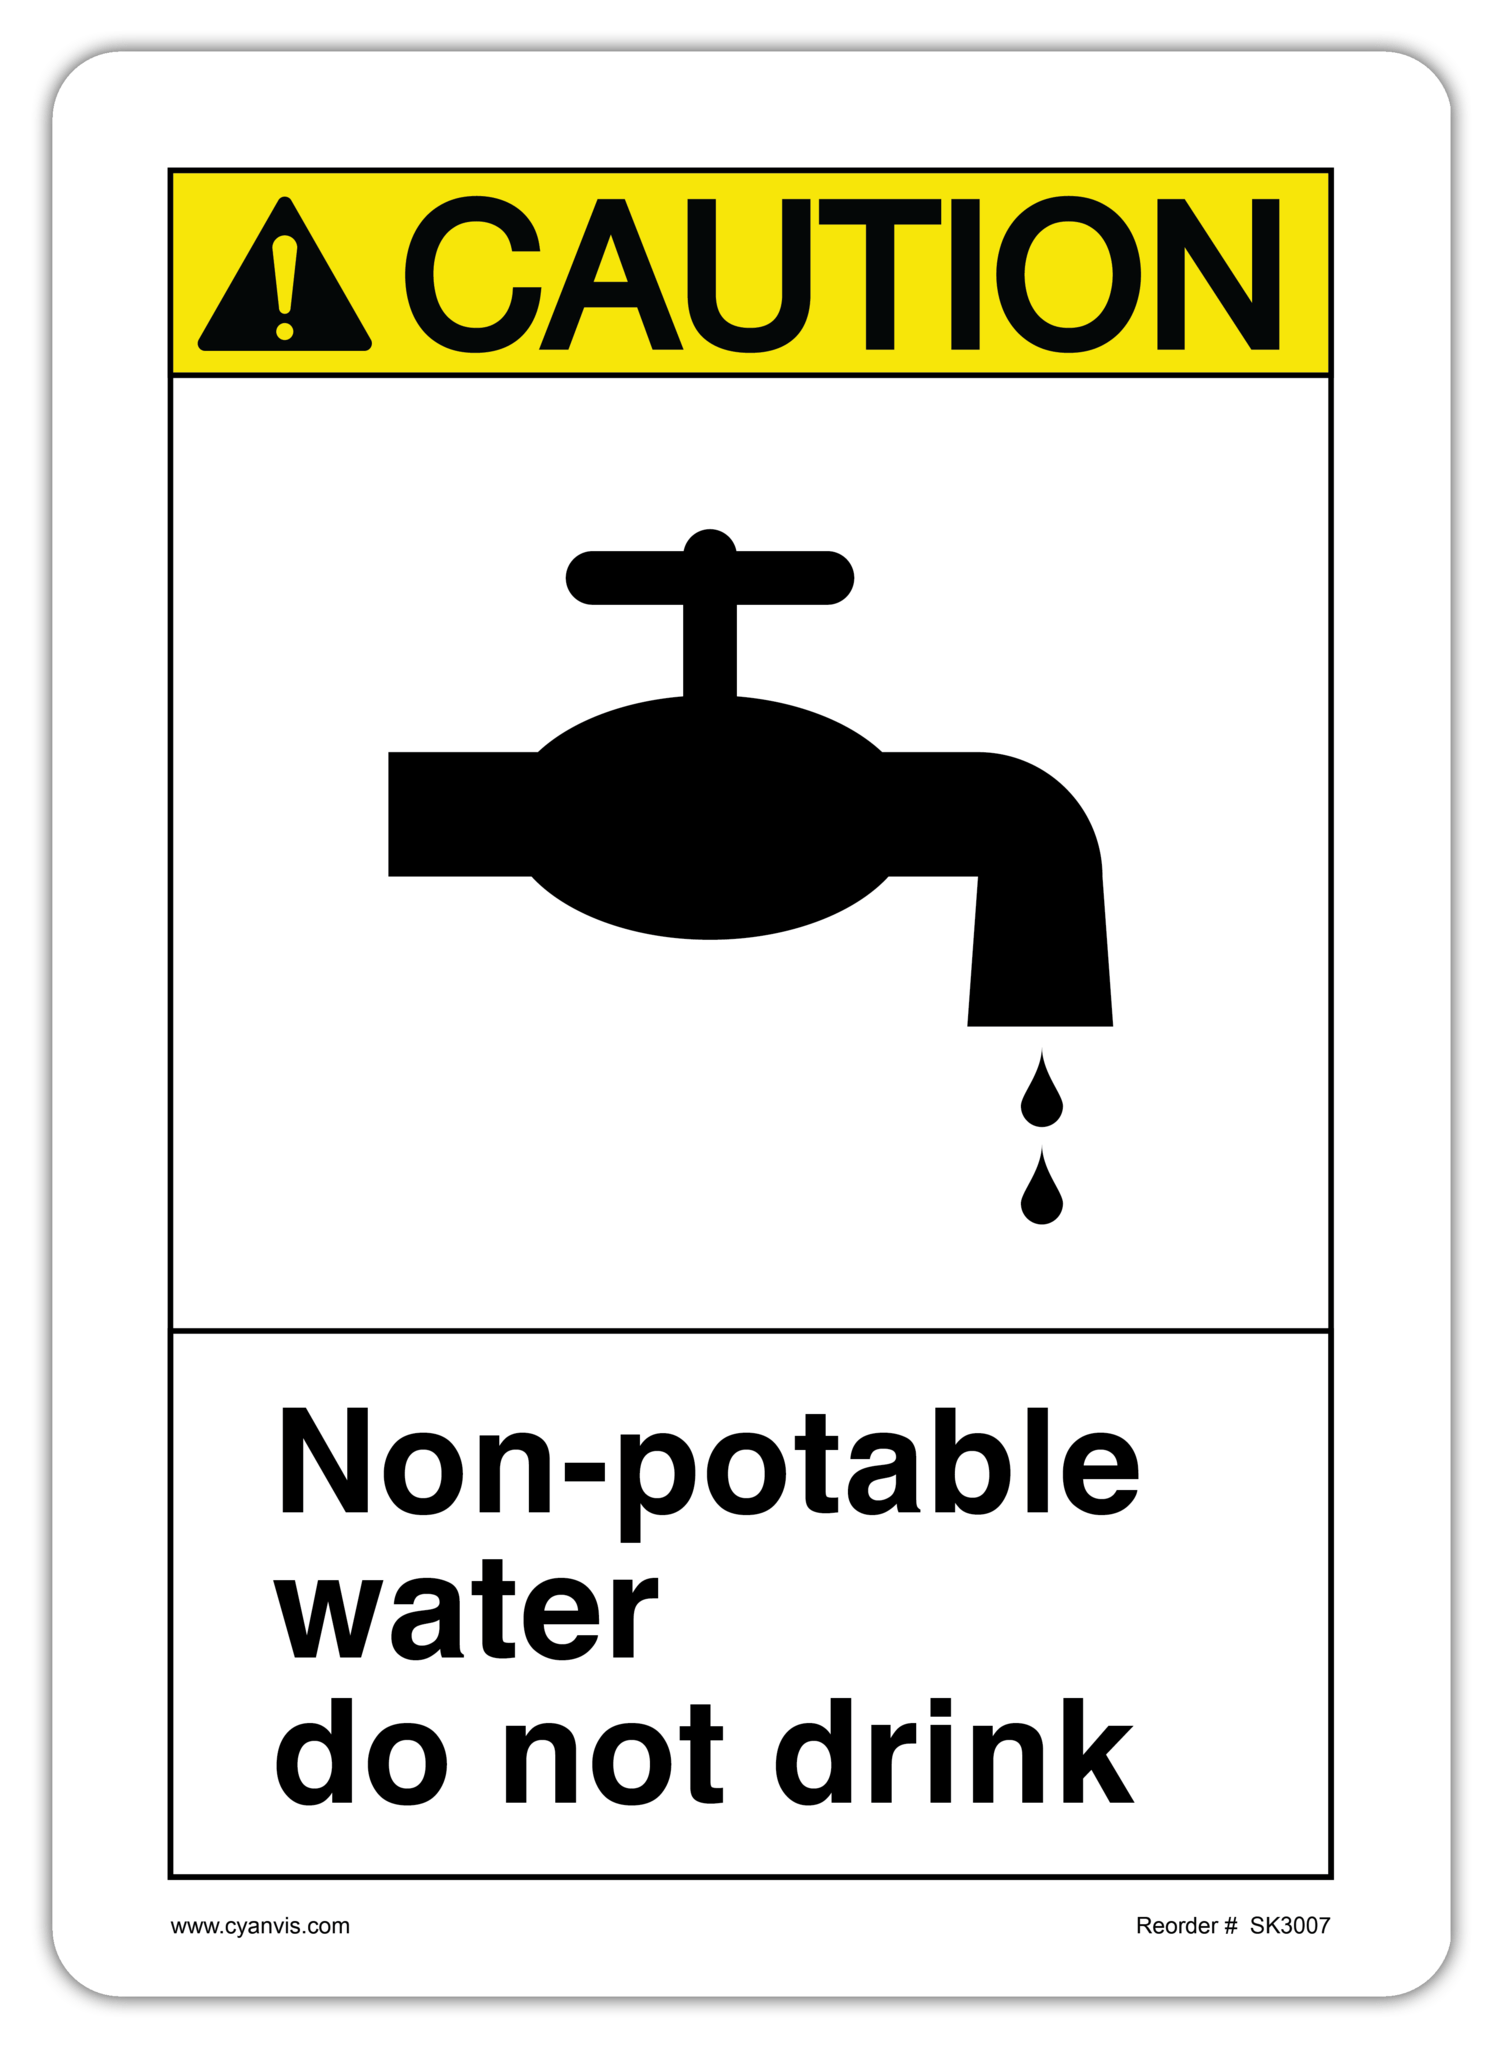 Safety Sign: ASNI - Caution - NON-POTABLE WATER DO NOT DRINK - CYANvisuals